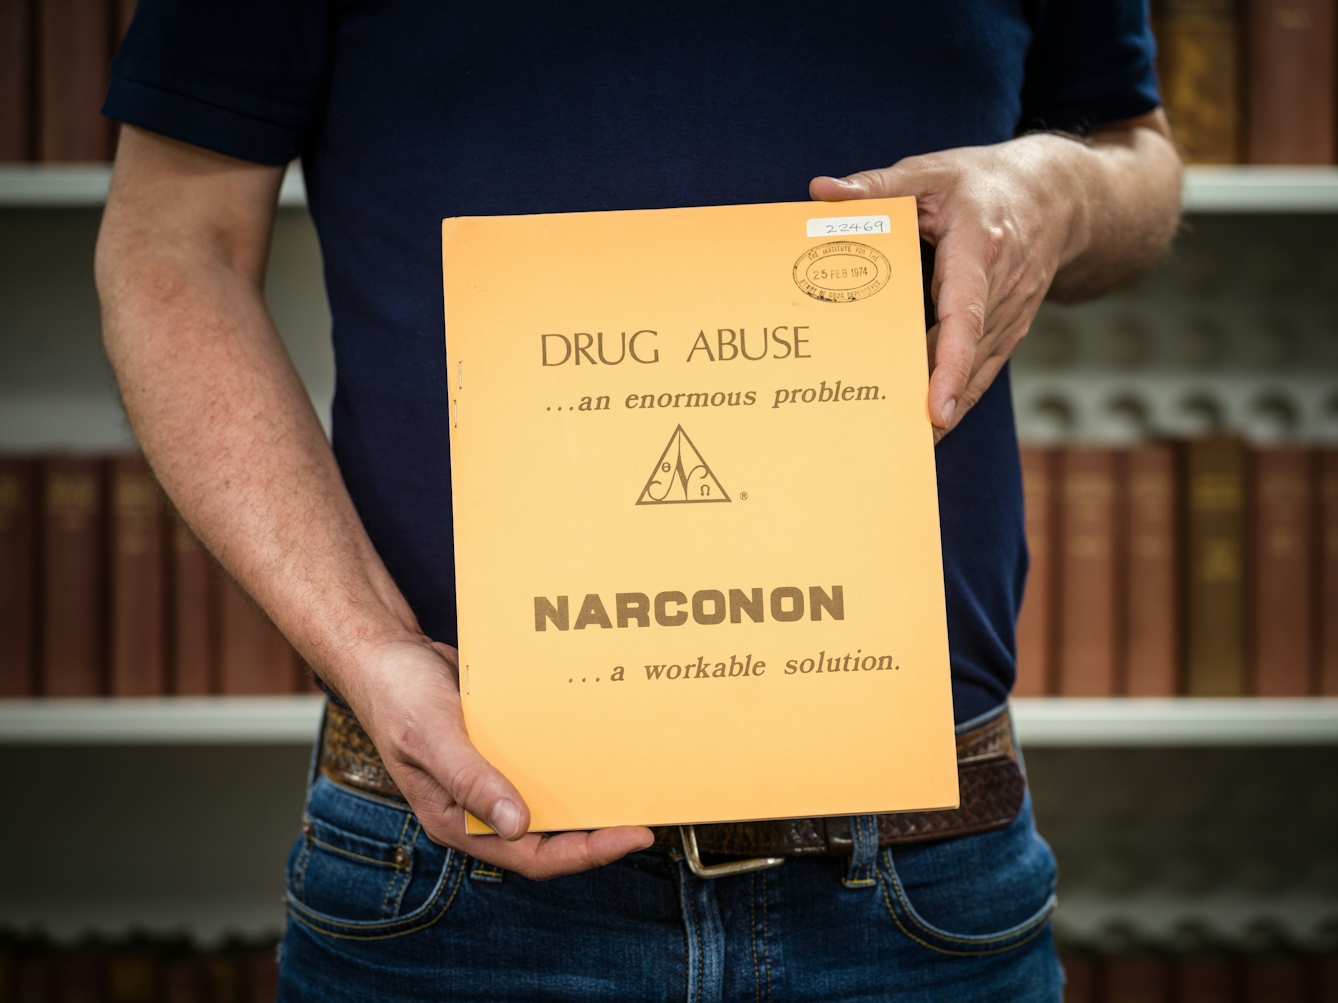 Photograph of the midriff of a man who is holding a pamphlet titled 'Drug abuse ...an enormous problem - Narconon ...a workable solution'. In the background are a set of out of focus shelves containing books.